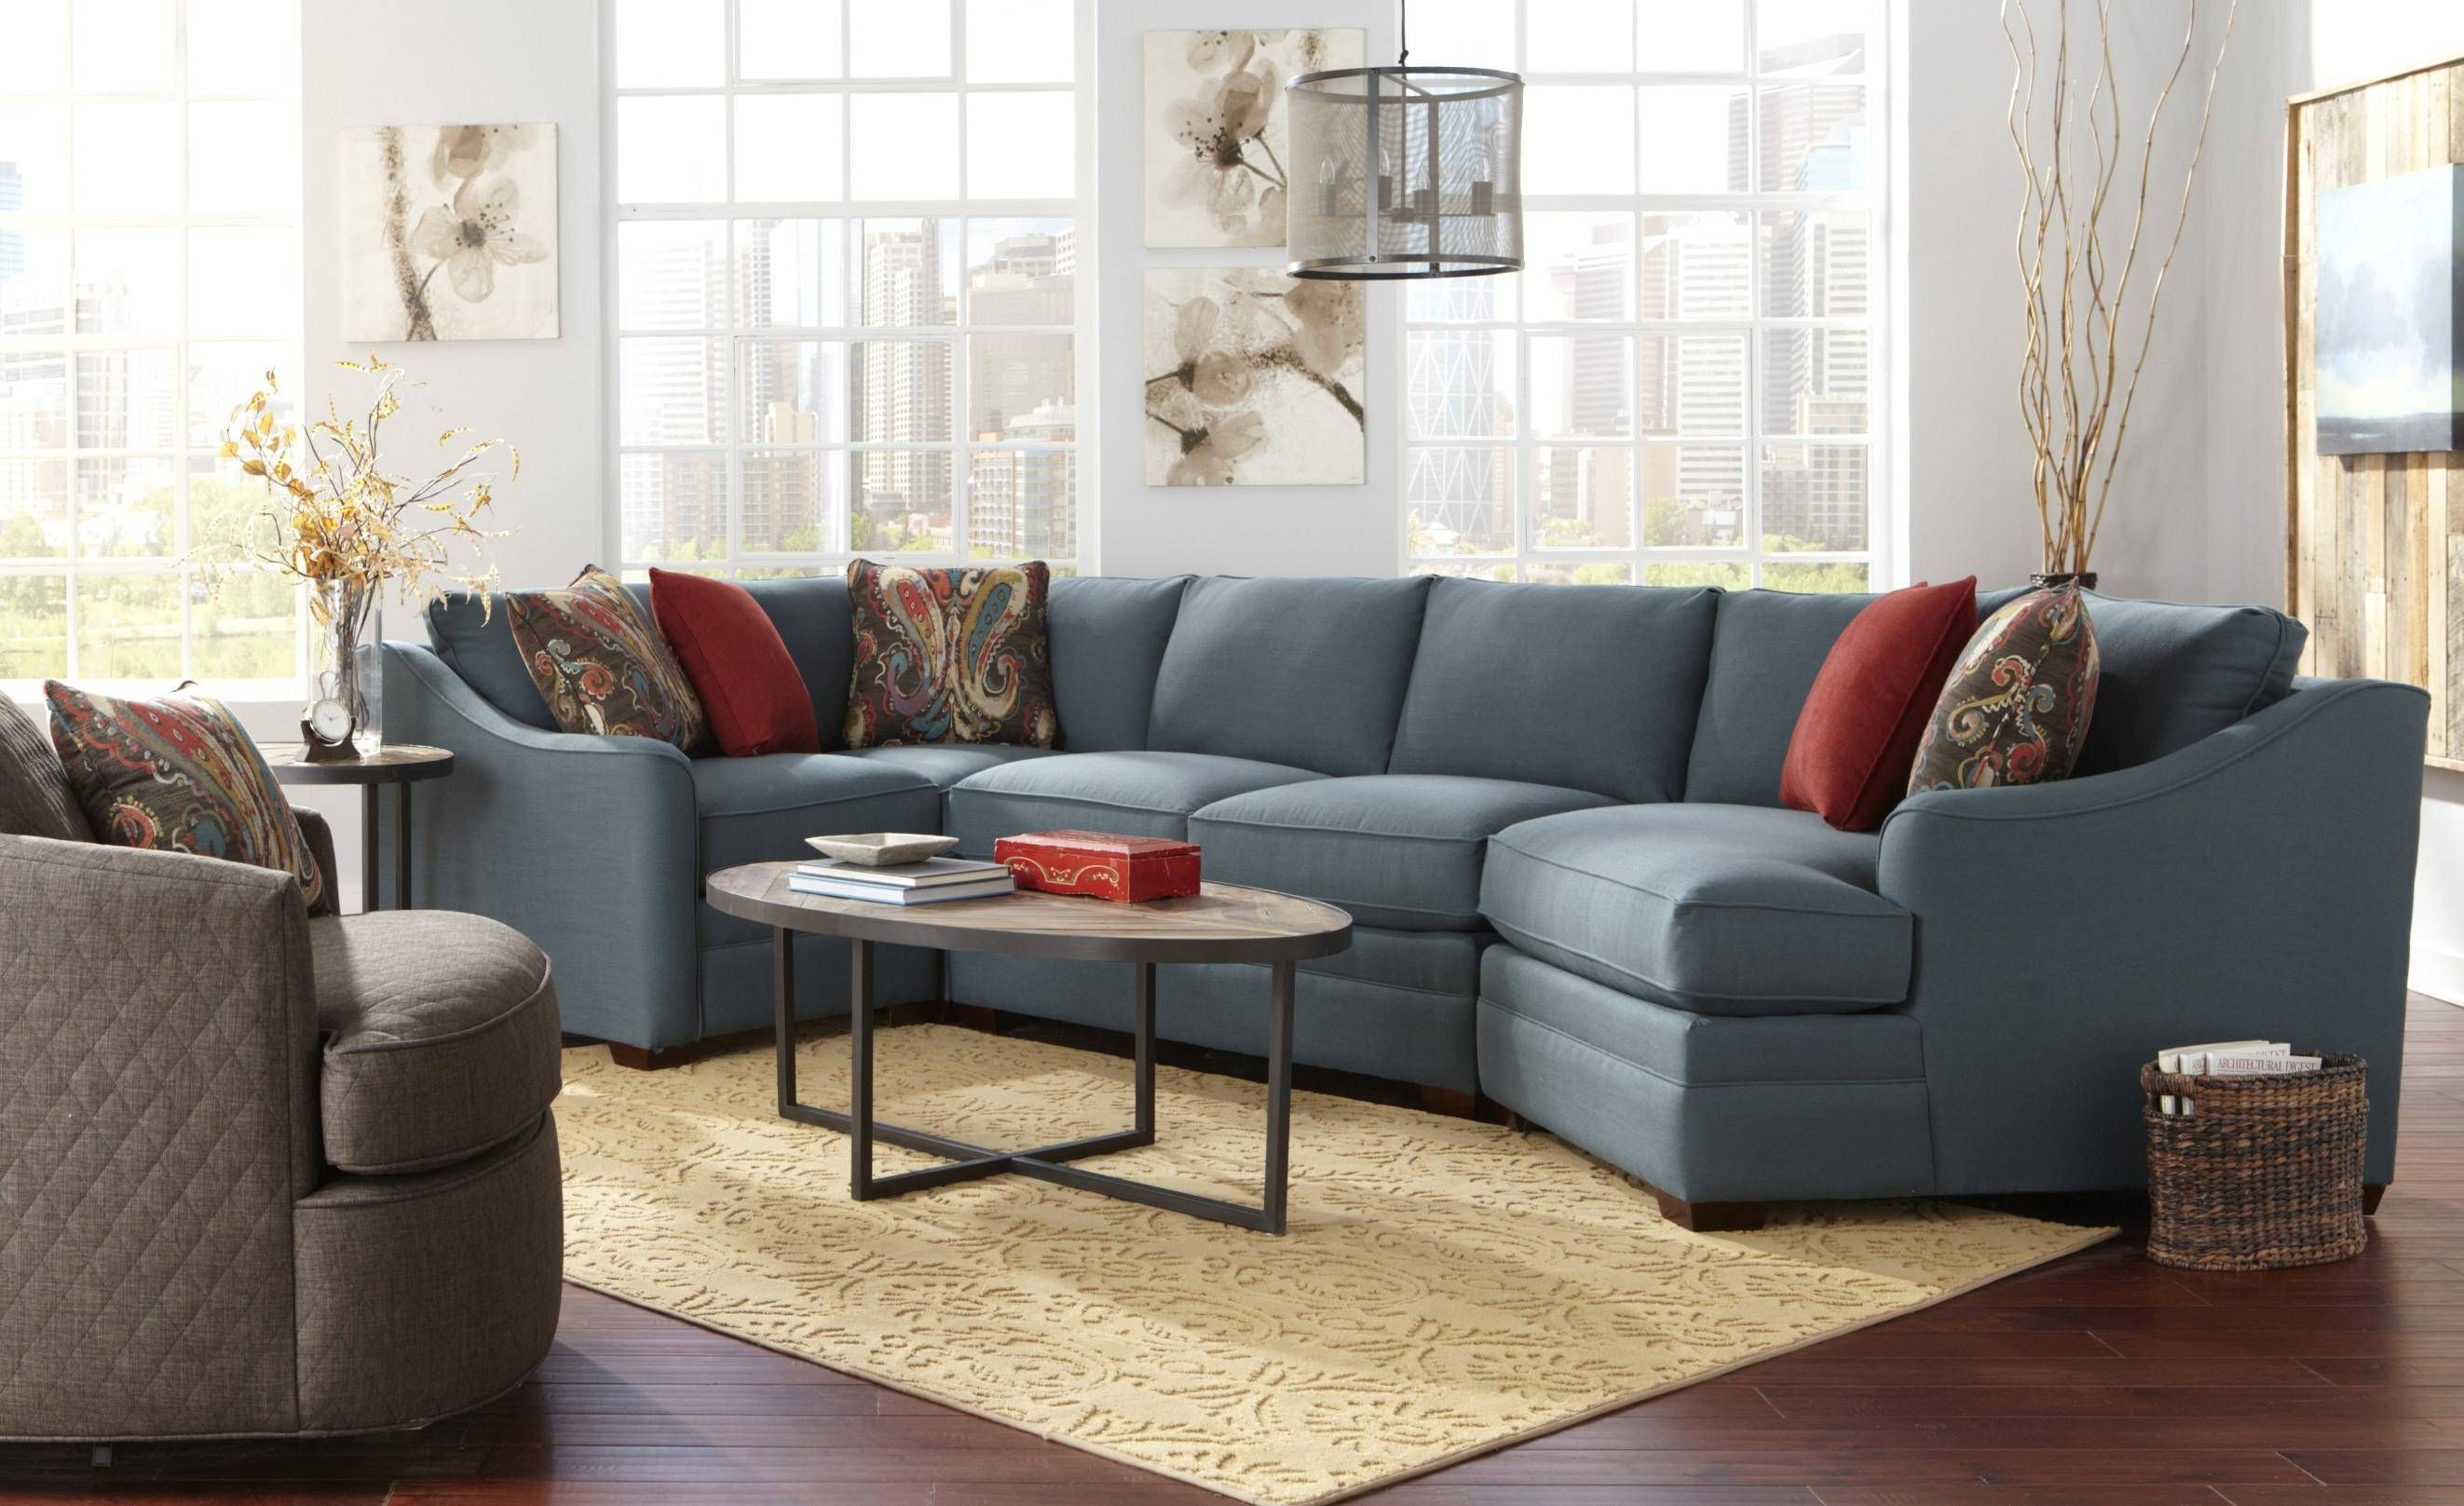 Sofas Center : Uniquectional Sofa With Cuddler Chaise Image For Sectional Sofa With Cuddler Chaise (View 5 of 25)